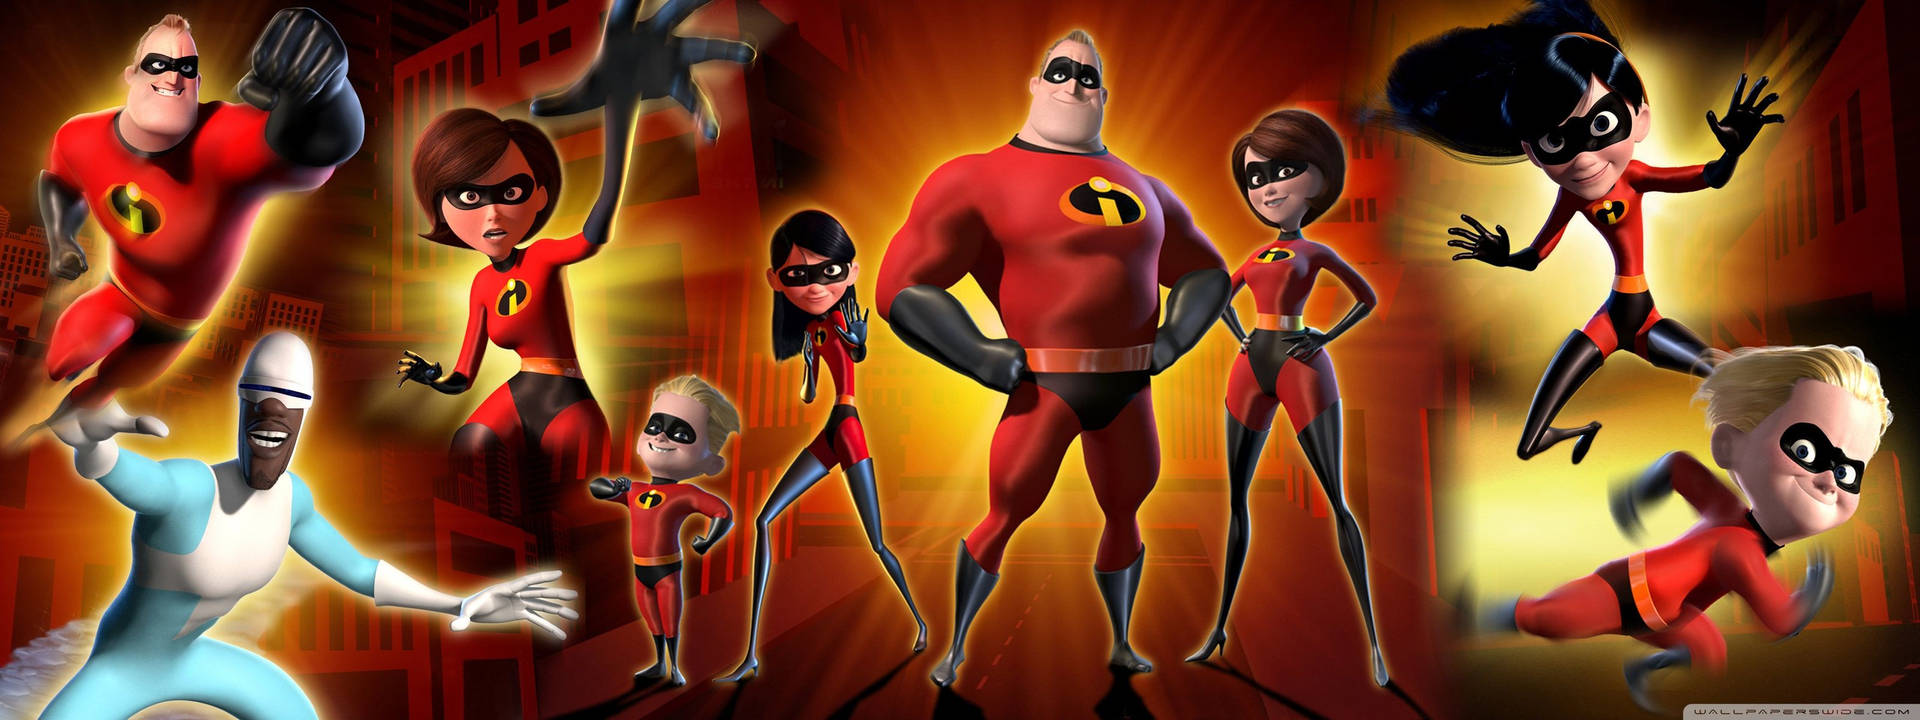 The Incredibles Digital Collage Wallpaper